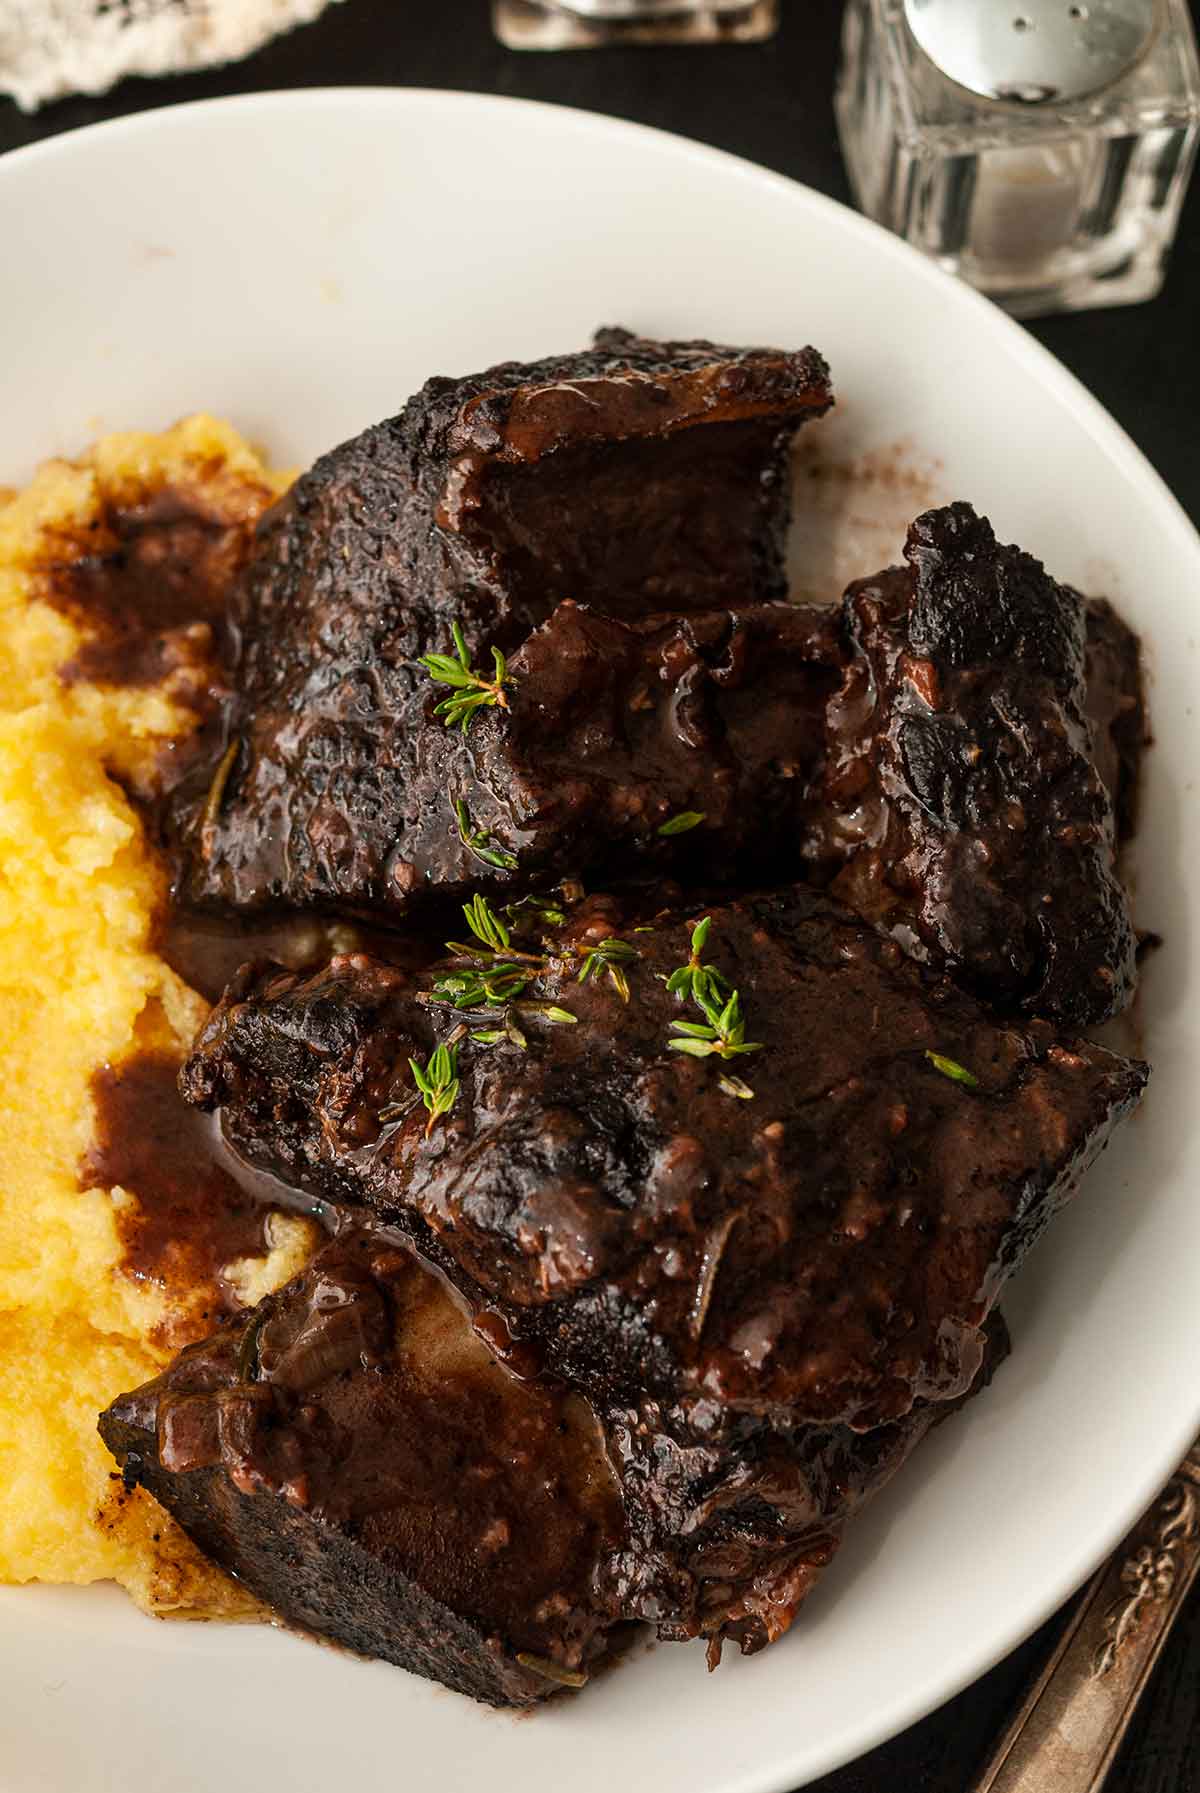 The meat of braised short ribs in a bowl with polenta, garnished with thyme.